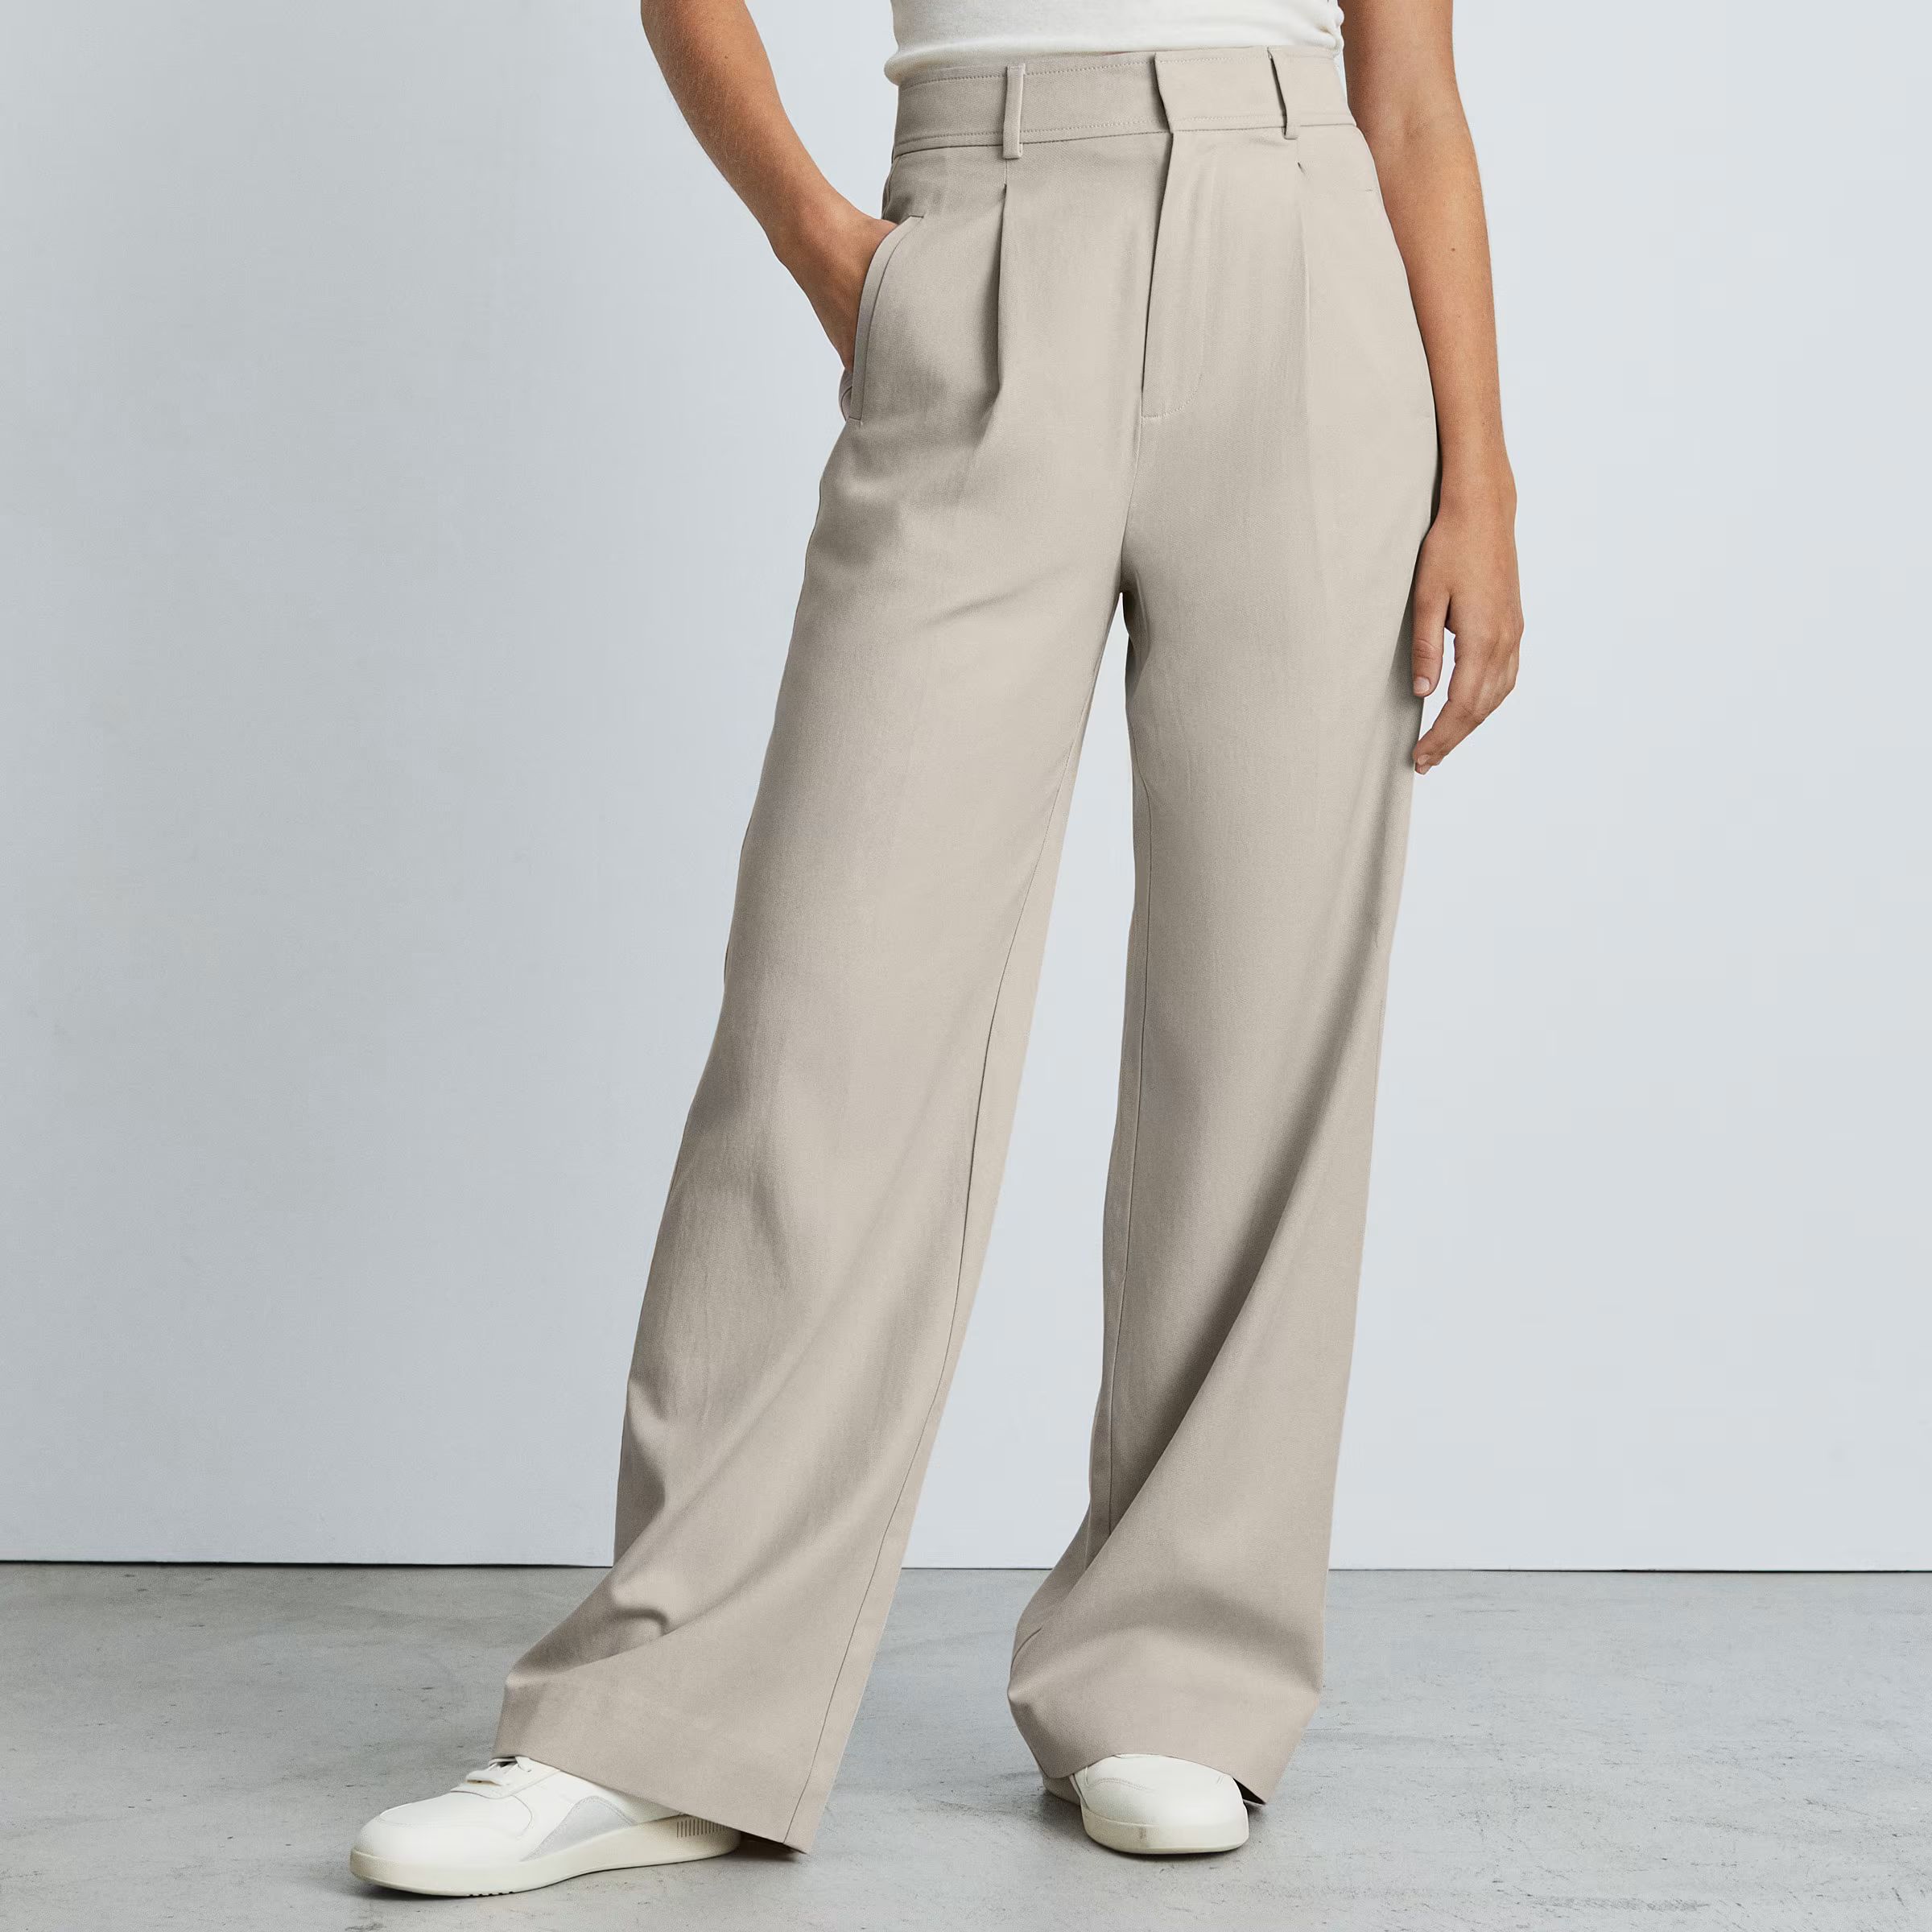 The Way-High® Drape Pant $1284.2 (344 Reviews)4.2 out of 5 stars. 344 reviews ‌ | Everlane